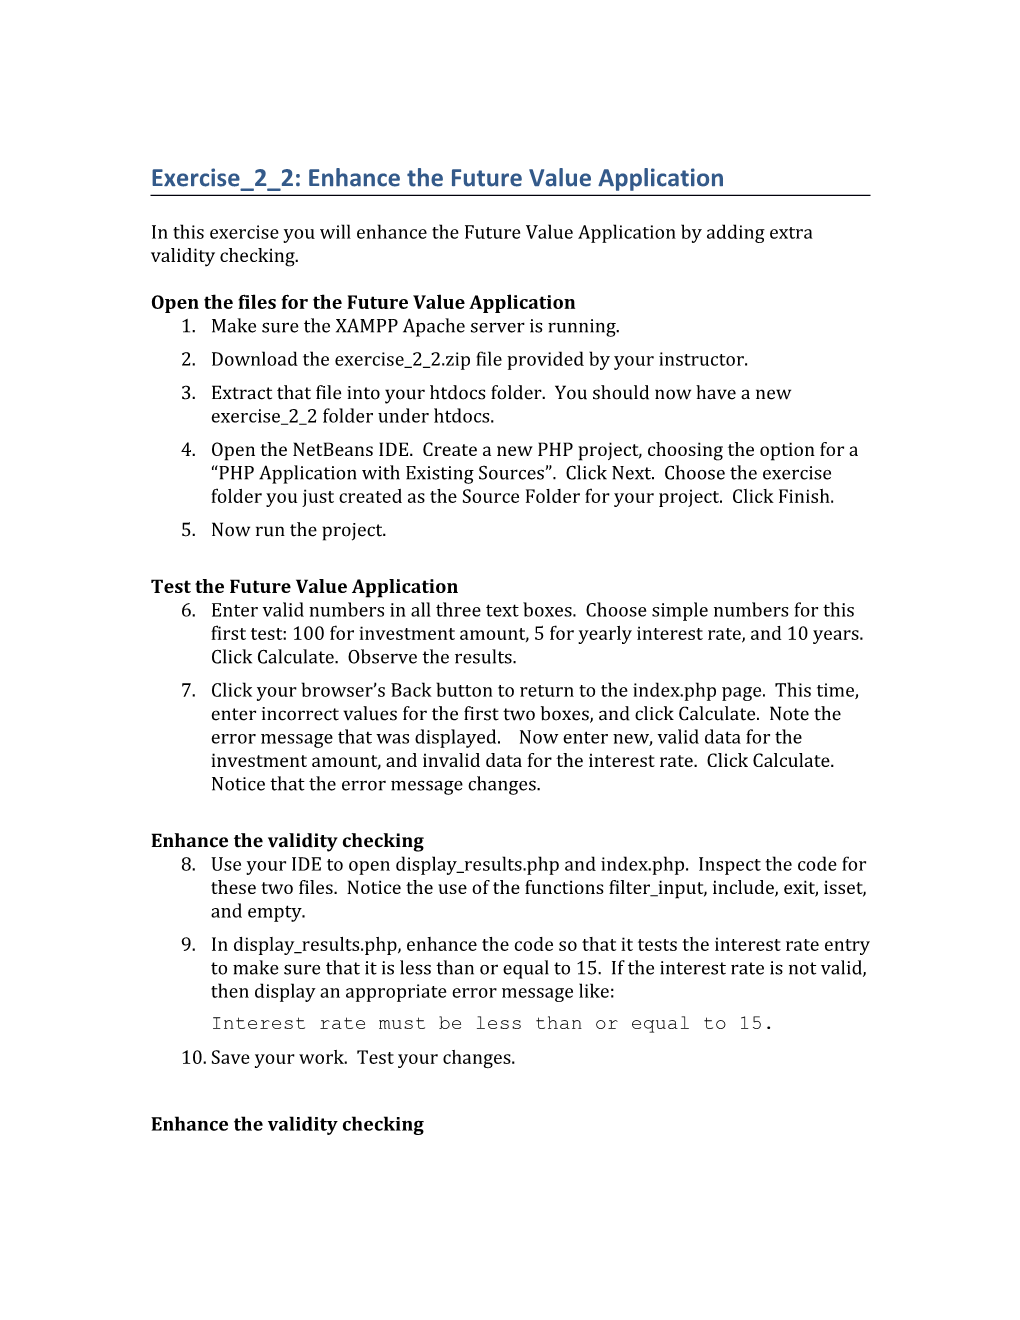 Exercise 2 2: Enhance the Future Value Application